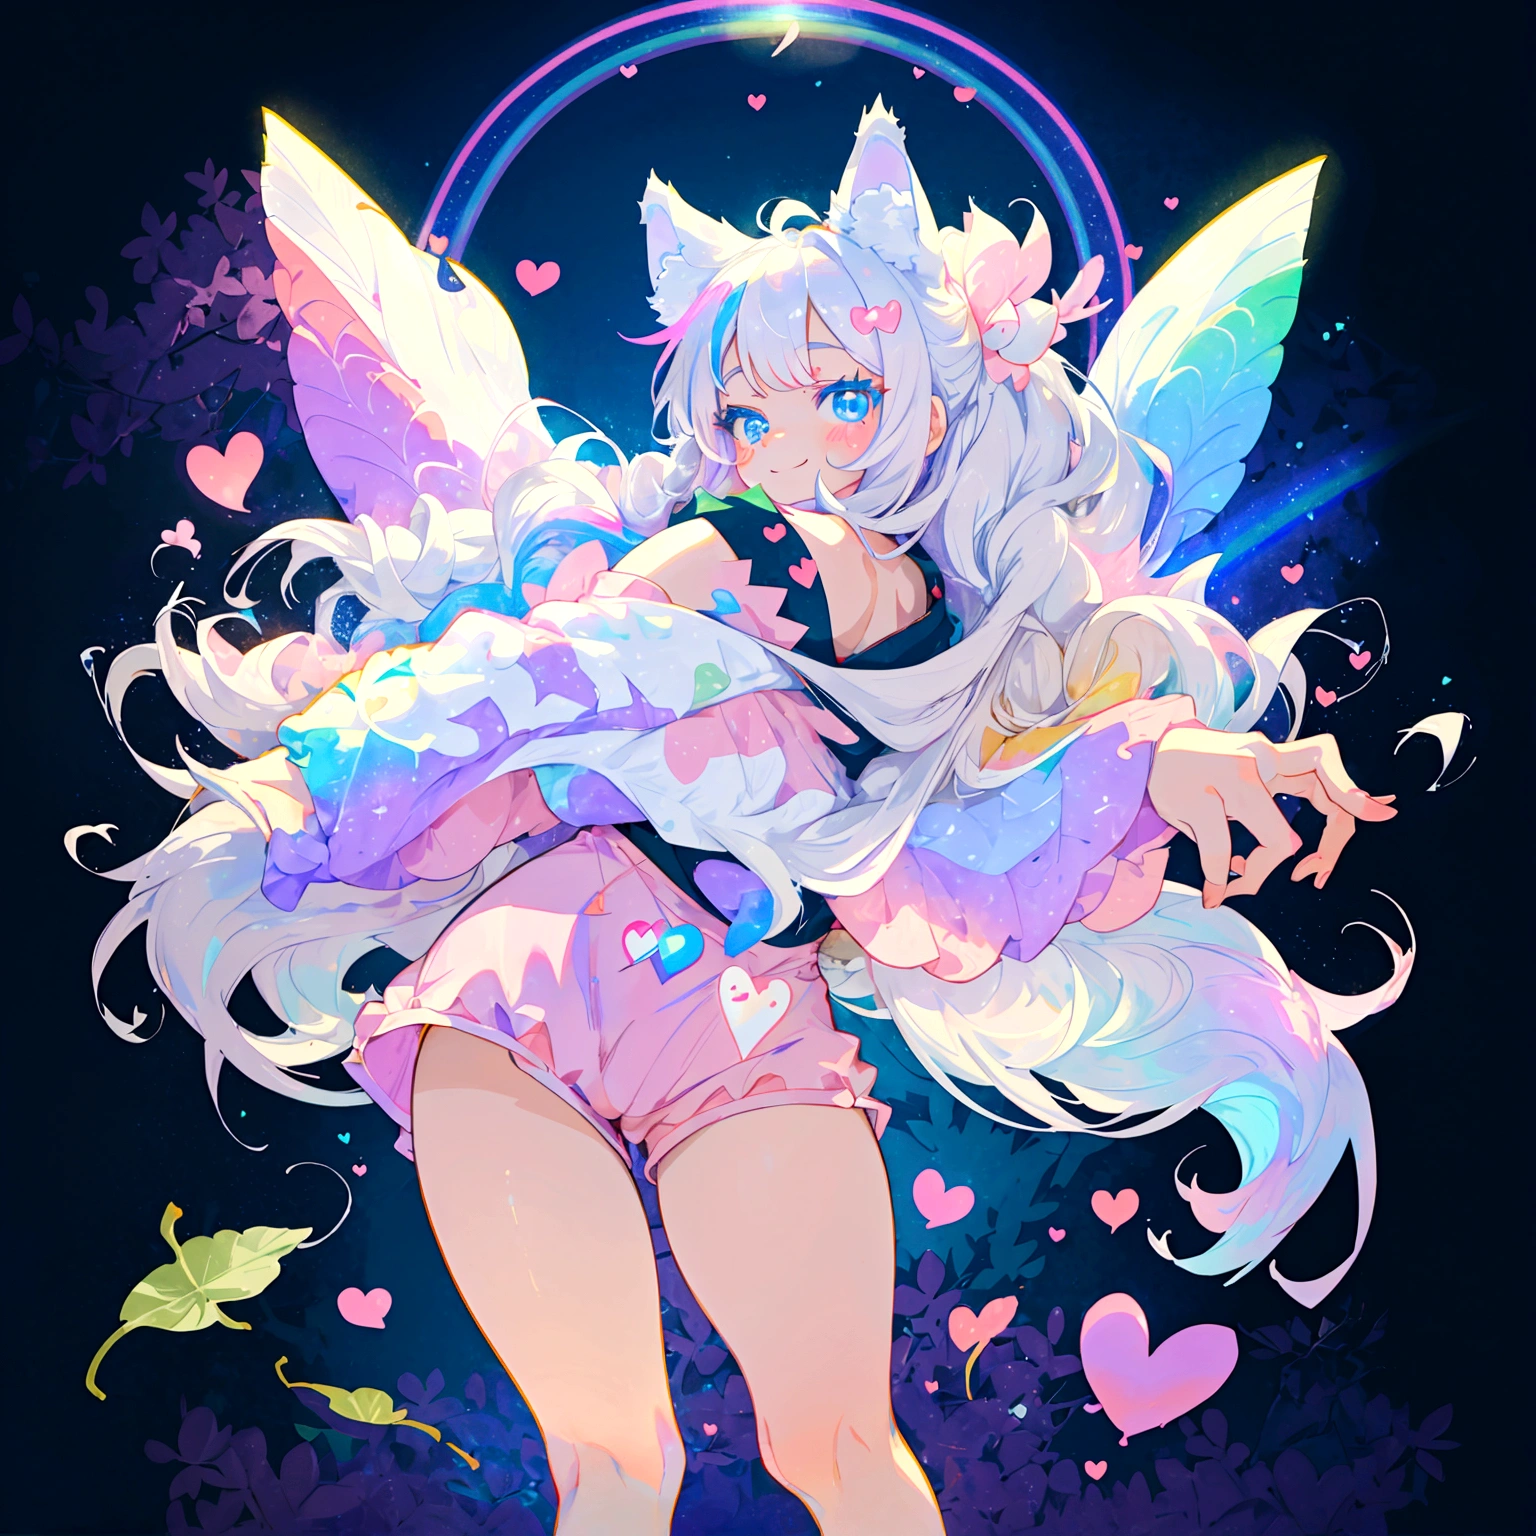 a cute adult male with wolf ears, long white hair, long locks, has a wolf tail, thick thighs, wide hips, short, wearing pink romper with a hood and pink shorts, has heart on chest, has bunny ears on hood, very slim, showing slender tummy, squishy thighs, has glowing blue eyes. alone, solo (ALONE)(SOLO), surrounded by rainbows, colorful galaxy backround, smiling, ontop of a pile of fluffy plushes, plushies everywhere, kawaii plushies, surrounded by bubbles, surrounded by rainbow leaves, standing up dancing, thicc thighs, stretching out